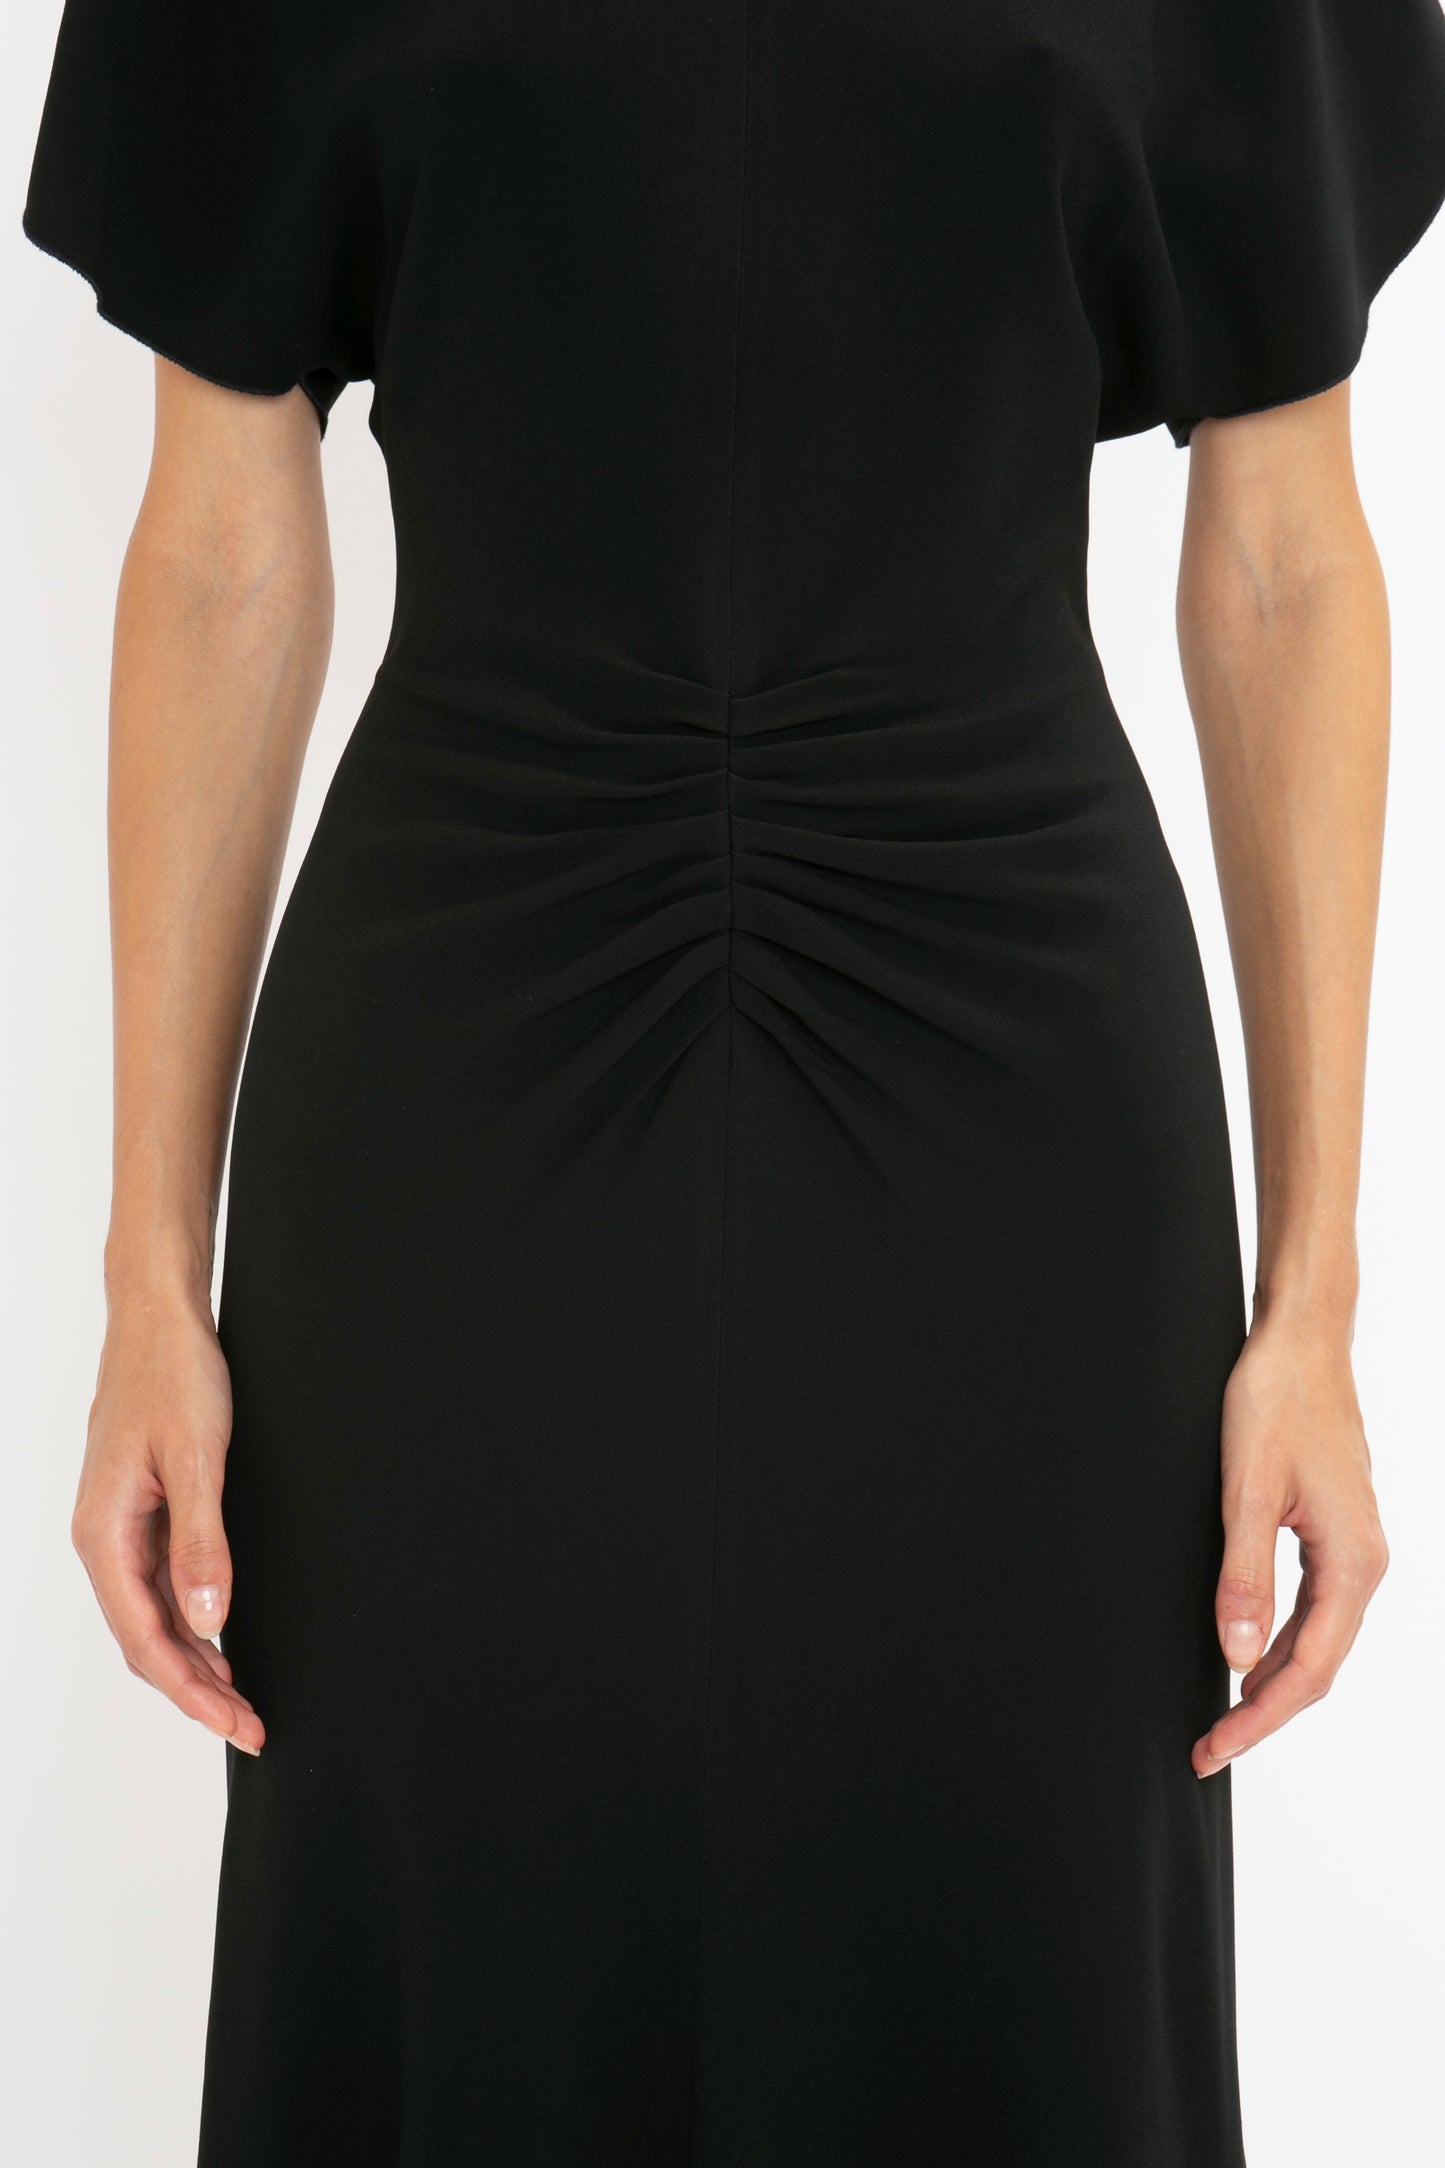 Woman wearing a Victoria Beckham black dress with short flutter sleeves and a gathered waist detail, viewed from a close midsection angle focusing on the dress design.